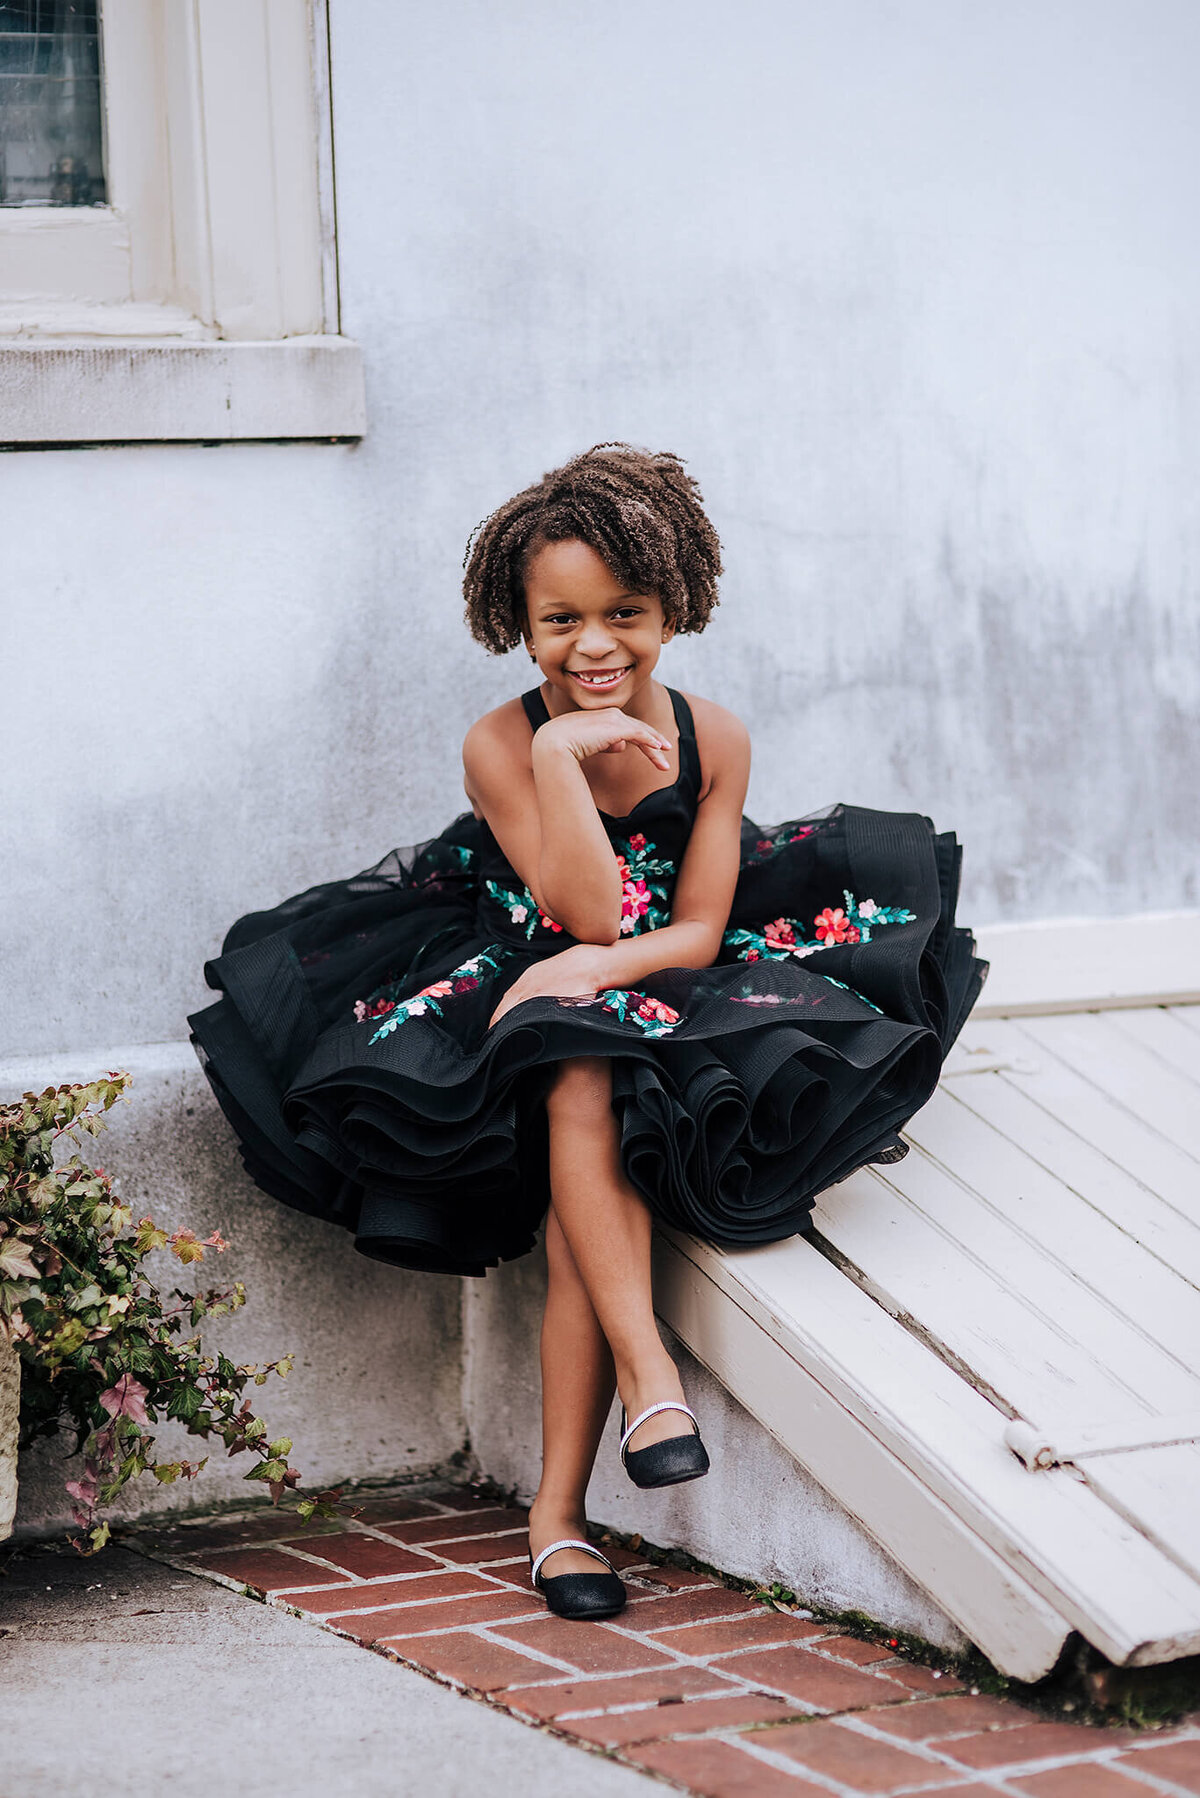 African American girl in a black floral dress with black shoes smiling with chin on her hand sitting on a city street in Fells Point Baltimore Maryland